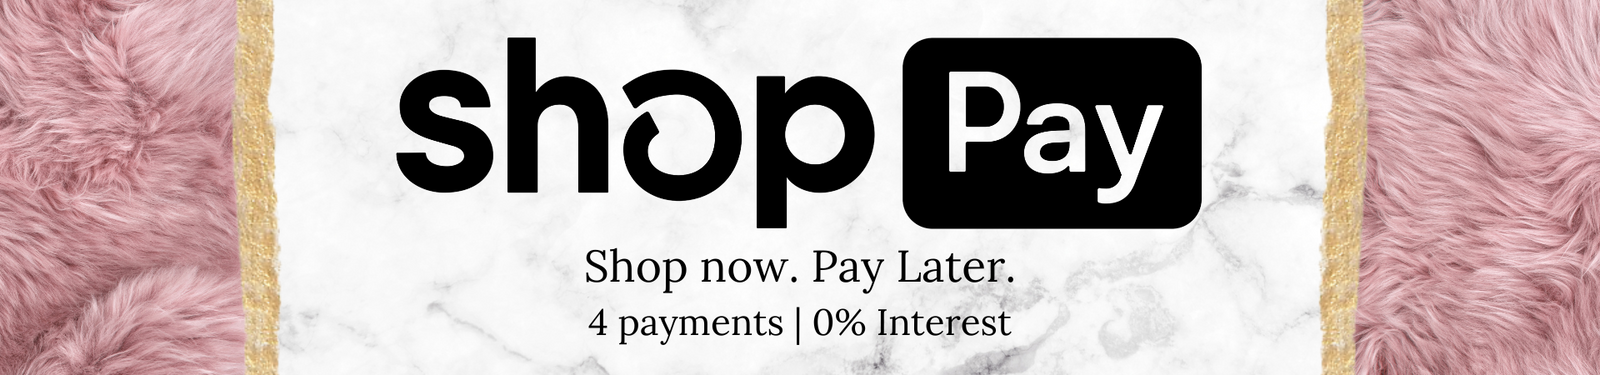 Sop Pay. Shop Now. Pay Later. 4 Payments. 0% Interest. | Inspired by Justeen | Chicago, IL 